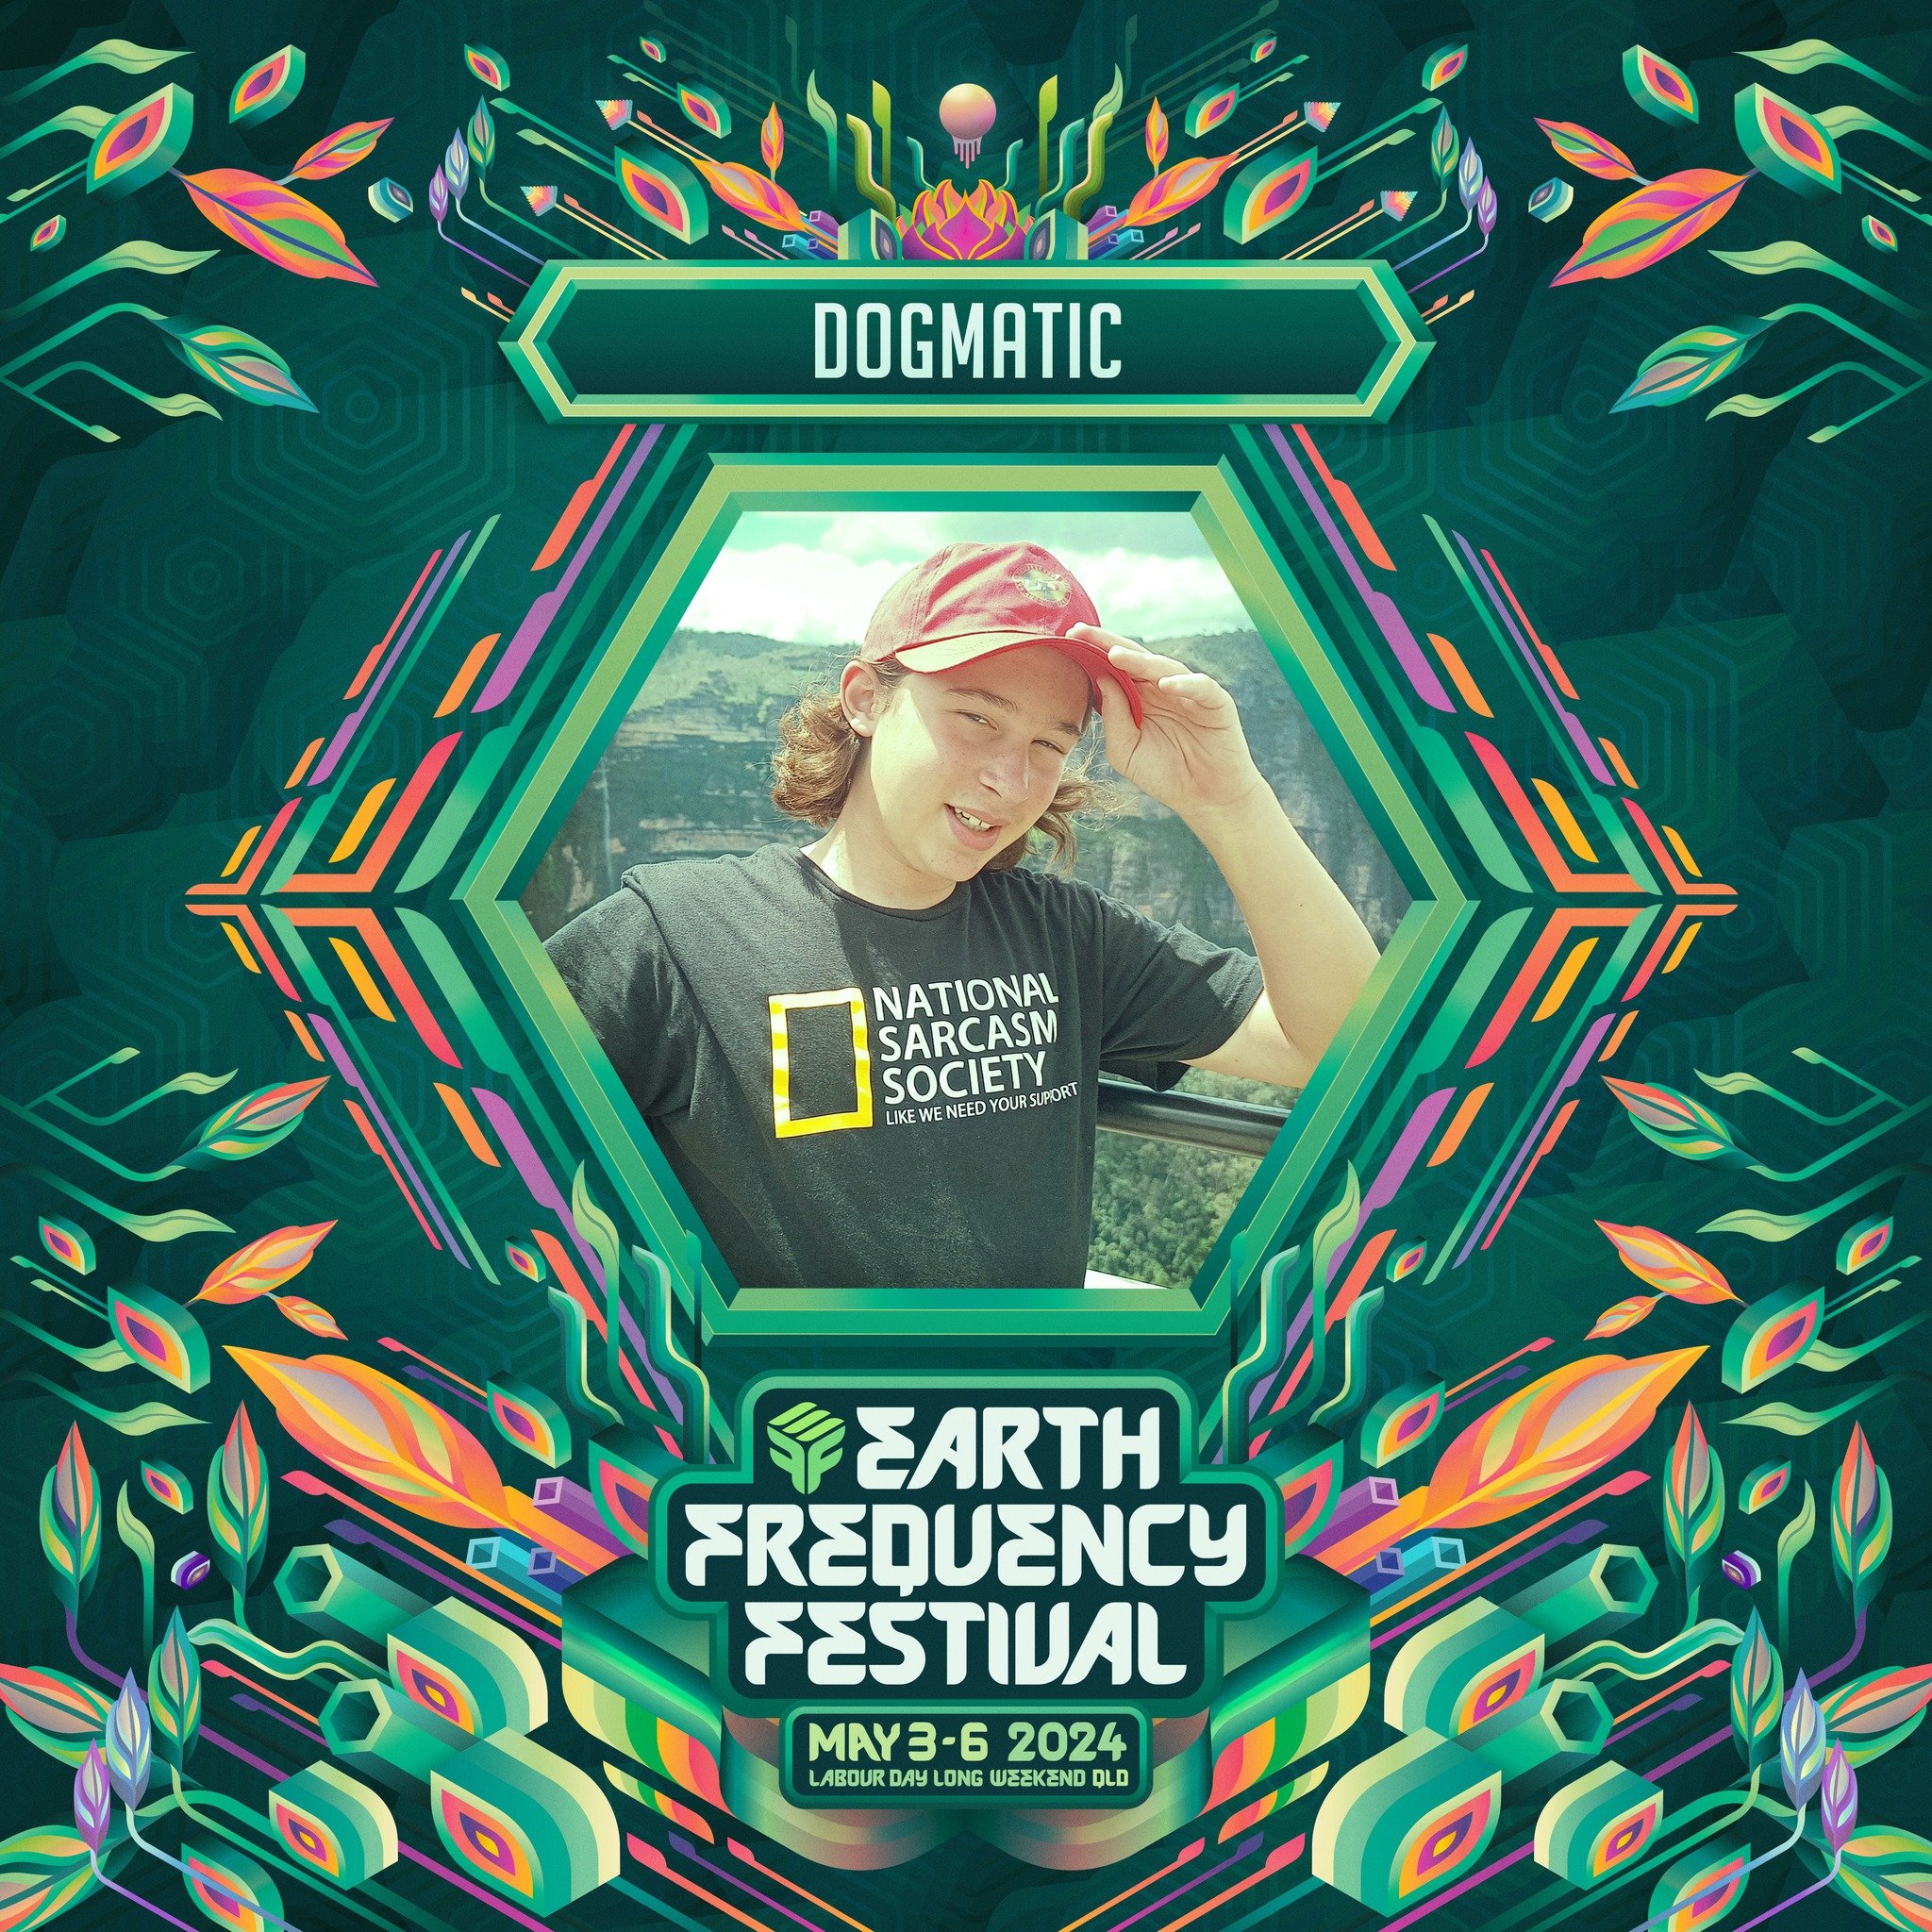 In conjunction with the mad raving crew of Renegade Playground, we are psyched to be able to present Brisbane's freshest DJ talent - Dogmatic! At the young age of only THIRTEEN, Dogmatic has already made a name for himself both overseas and locally a